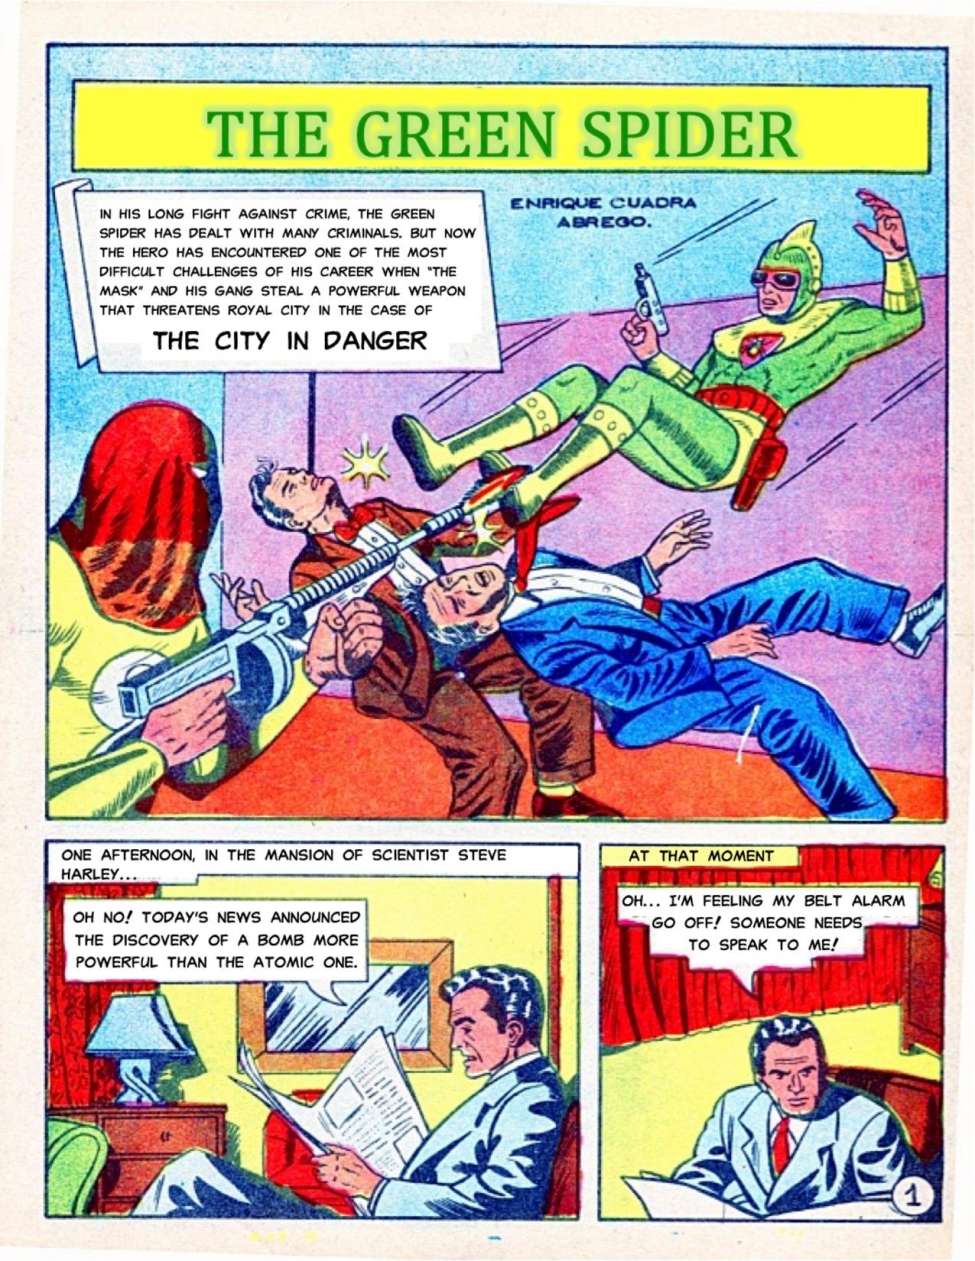 Comic Book Cover For The Green Spider 2: The City in Danger (translation)